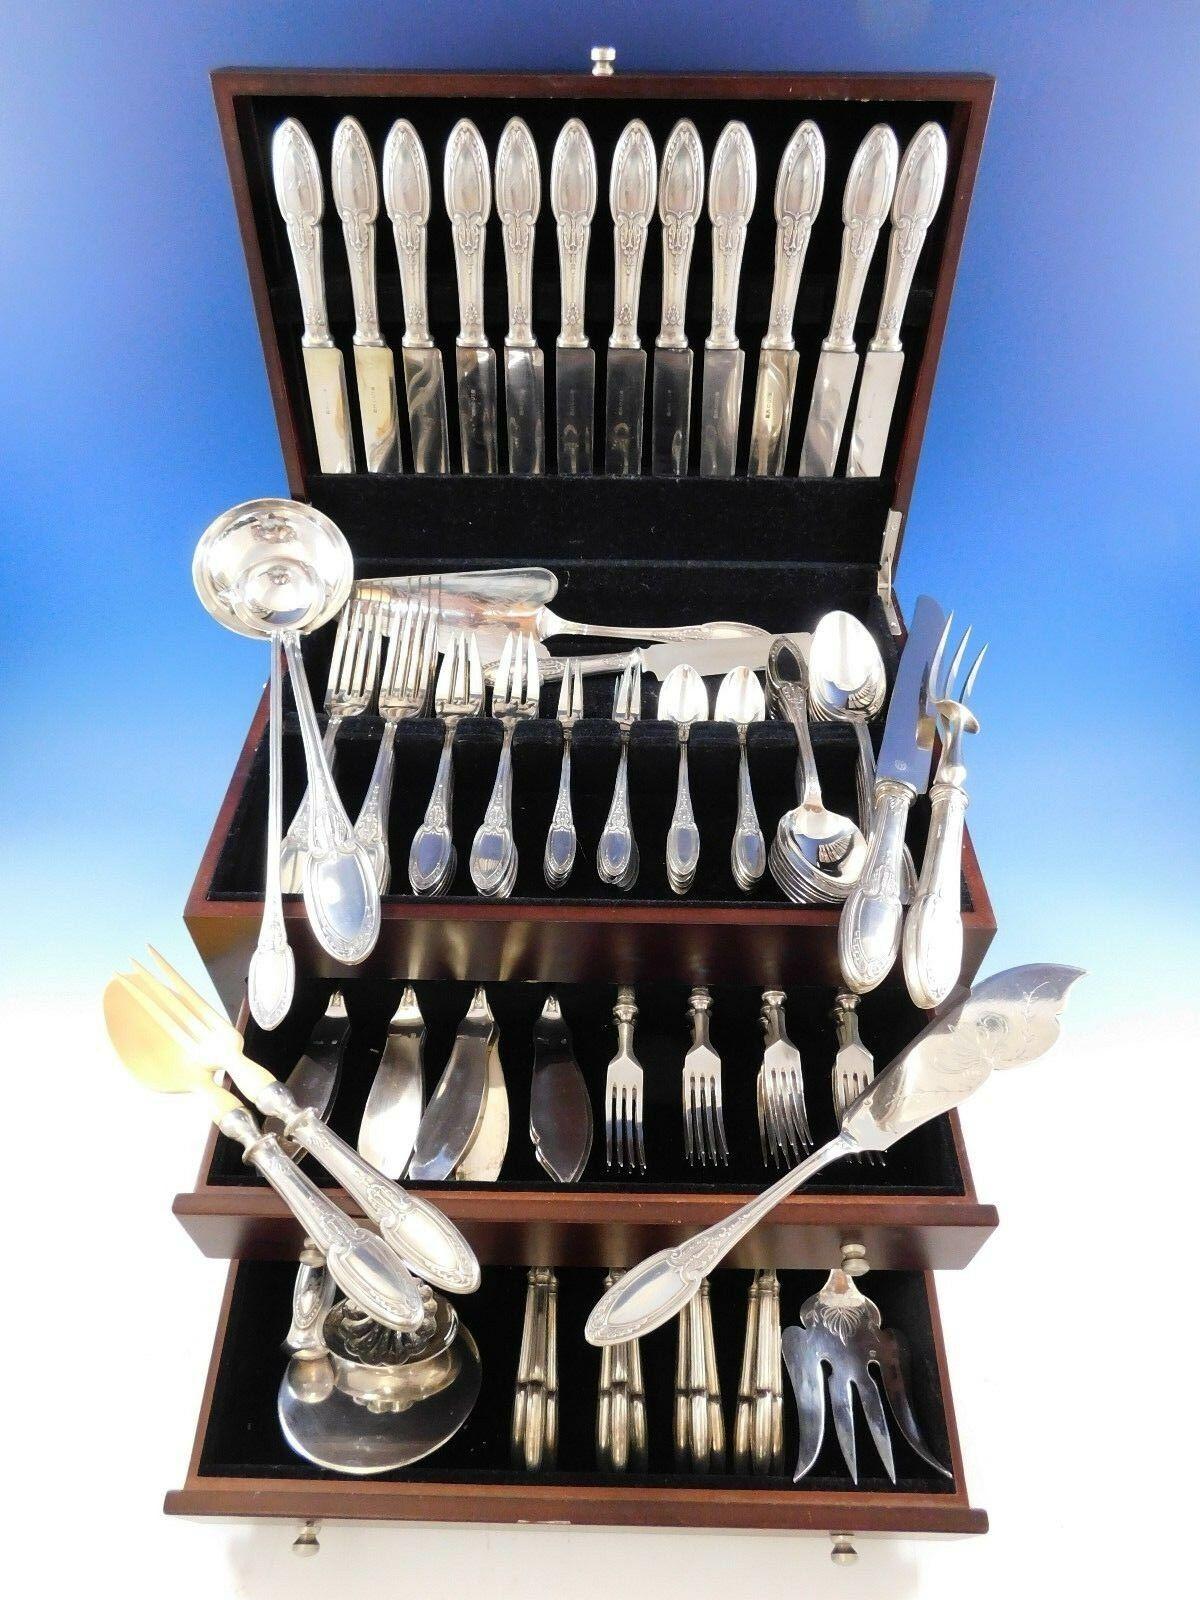 Monumental Empire by Erquis silver plated dinner size flatware set, 122 pieces. This set includes:

12 dinner knives, 10